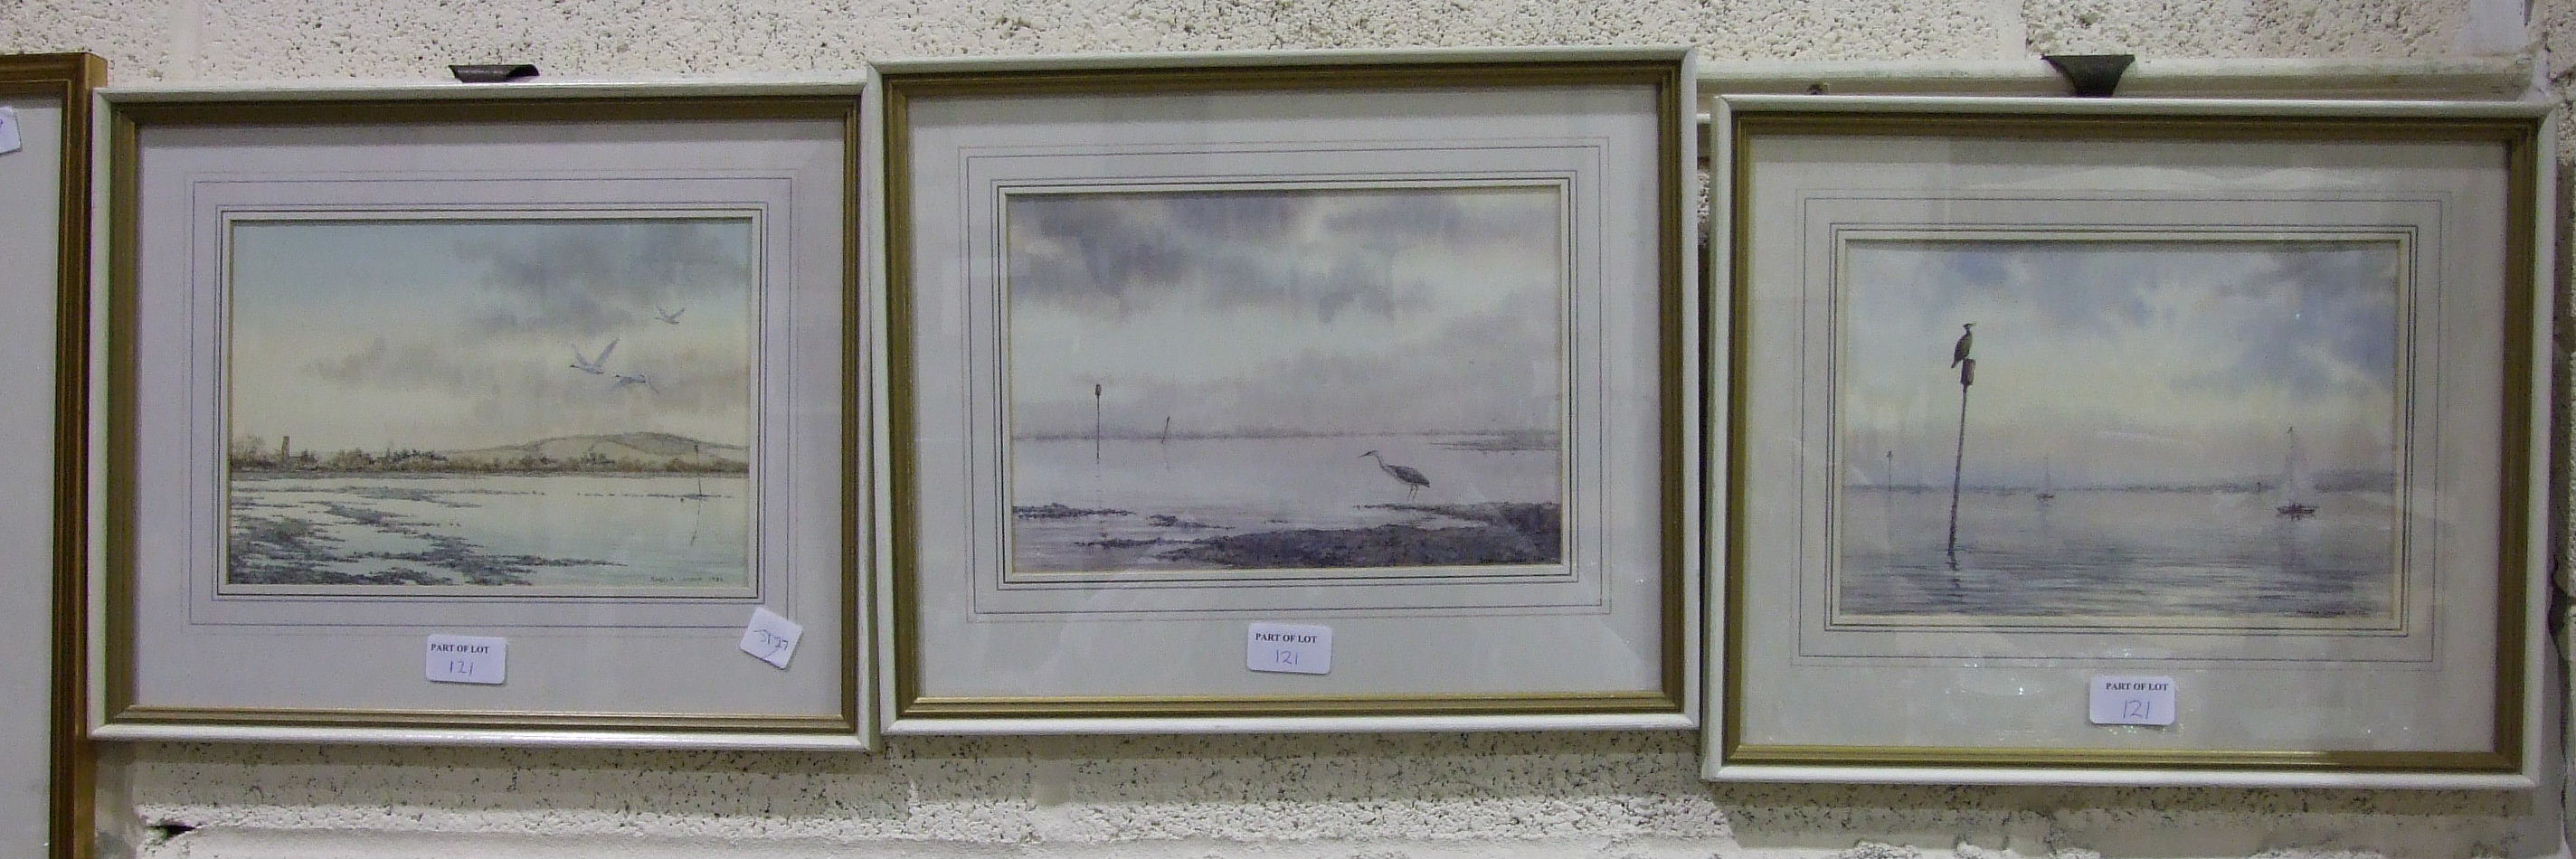 Angela Loader, Mallard Ducks on River, a signed watercolour dated 1988, 35 x 47cm, Towards Evening - - Image 3 of 4